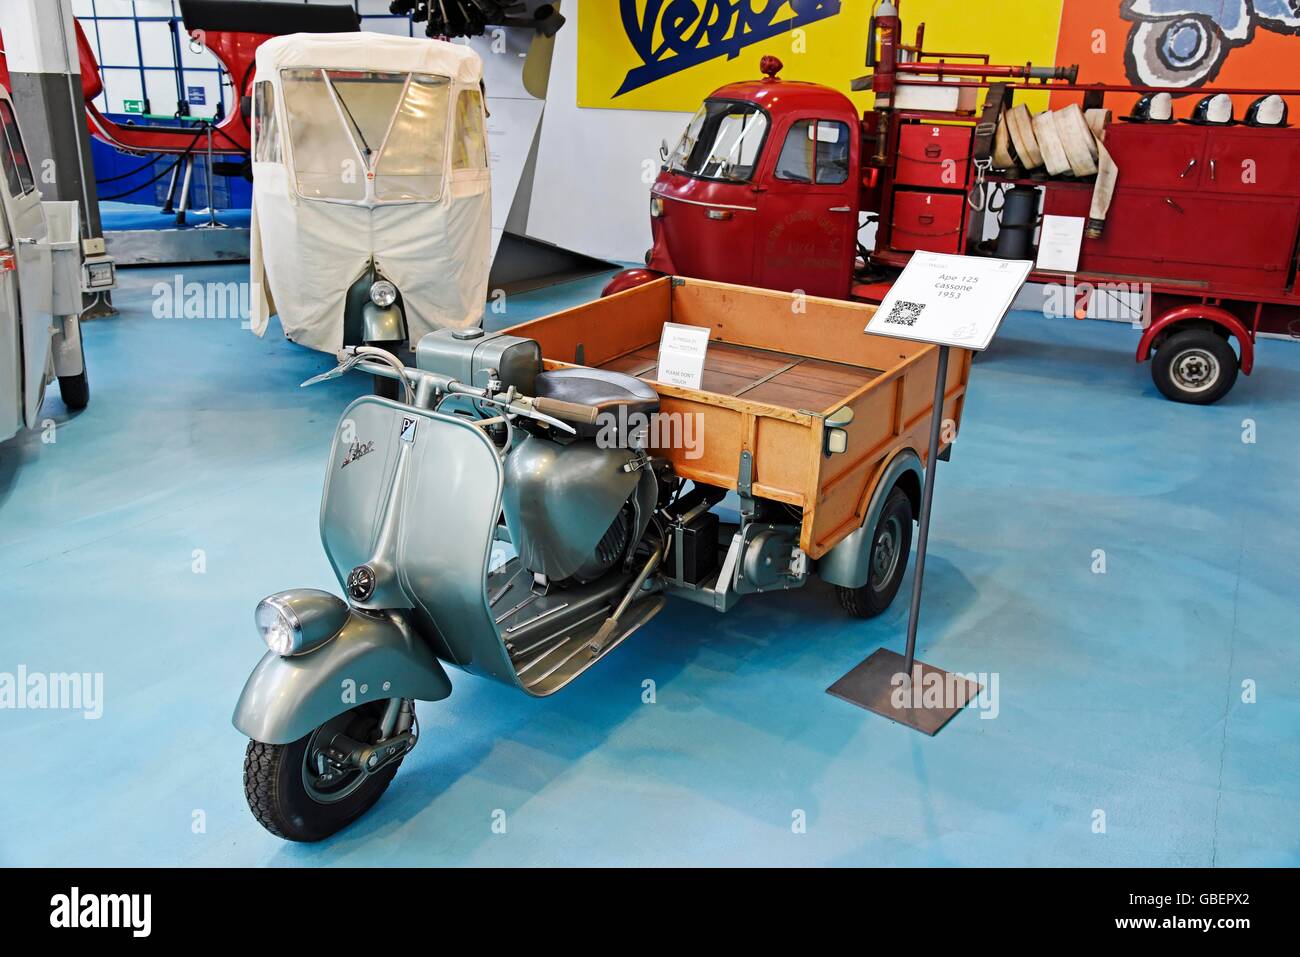 Ape 125 Cassone, historical scooter, scooter, vehicle, vespa, Museo Piaggio, museum, Pontedera, Province of Pisa, Tuscany, Italy Stock Photo